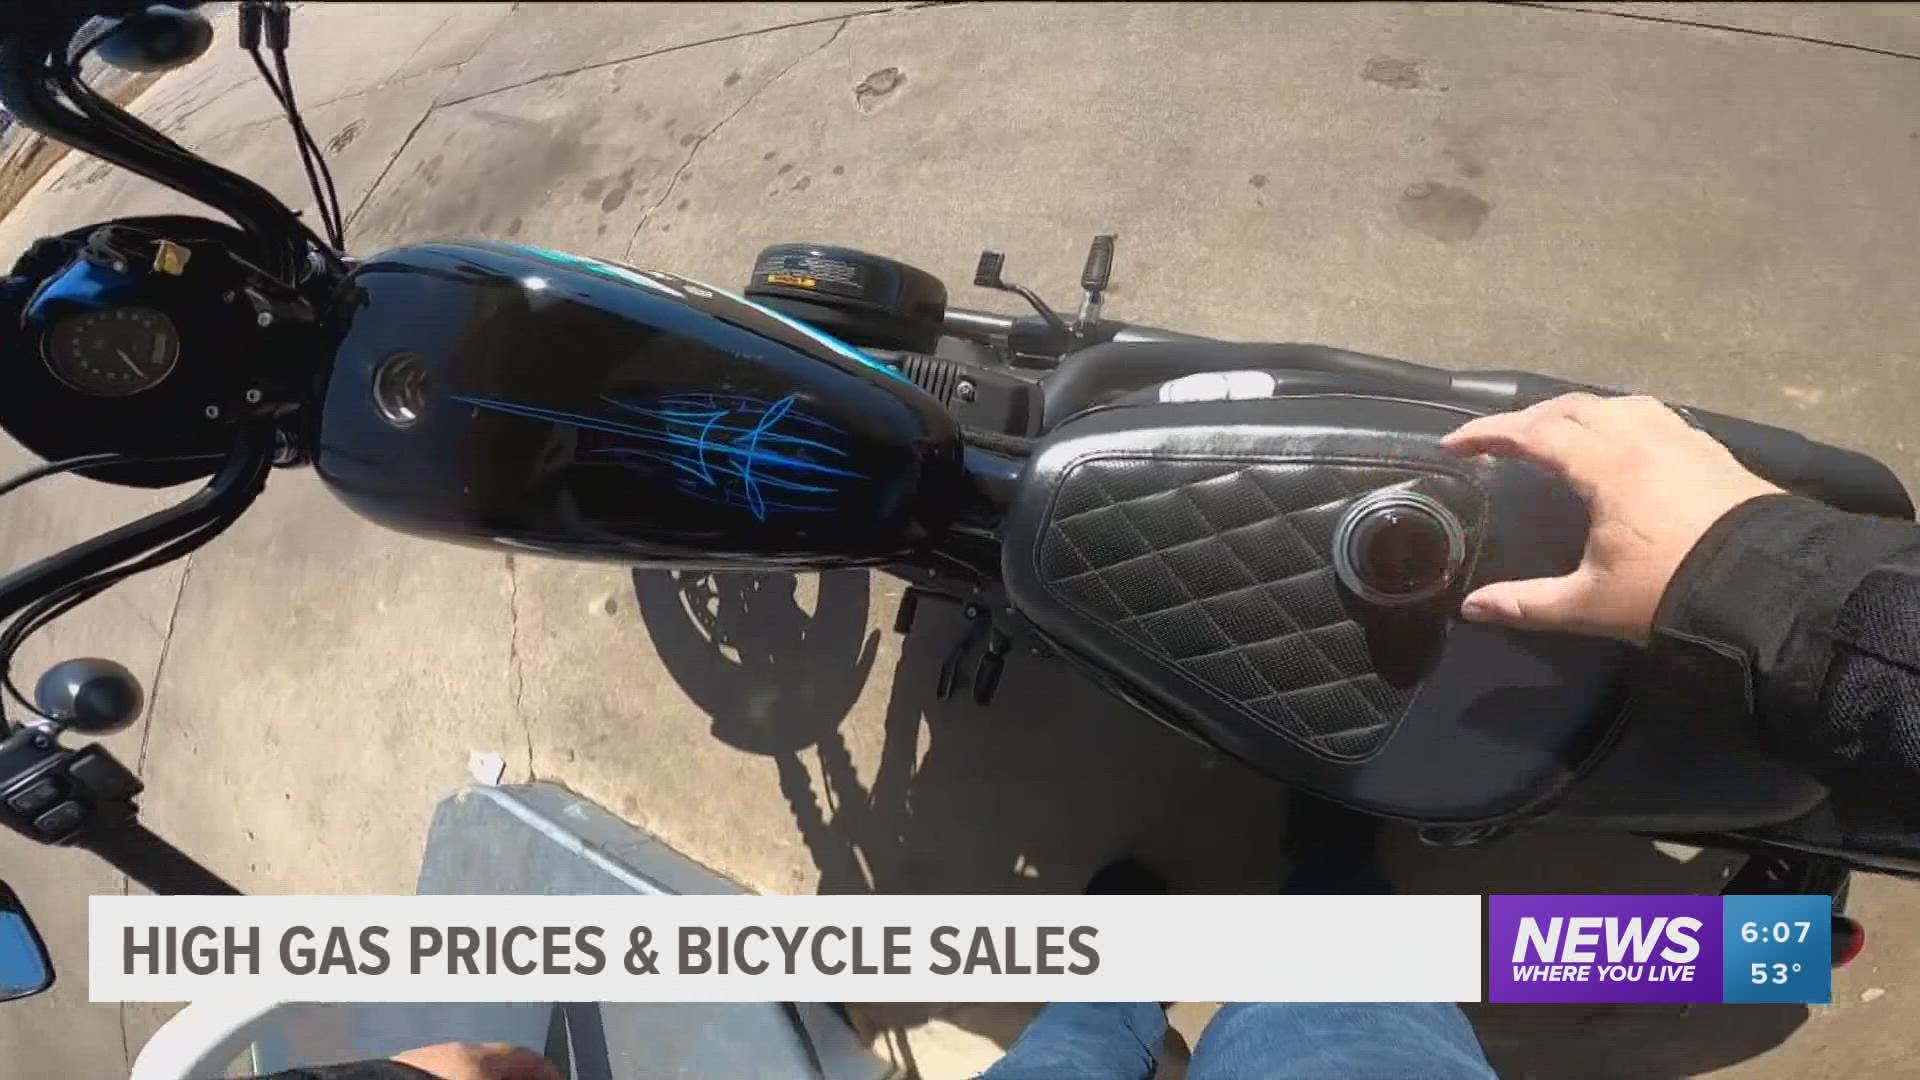 With gas prices on the rise, some locals are finding alternate modes of transportation, like electric bikes, to save money.